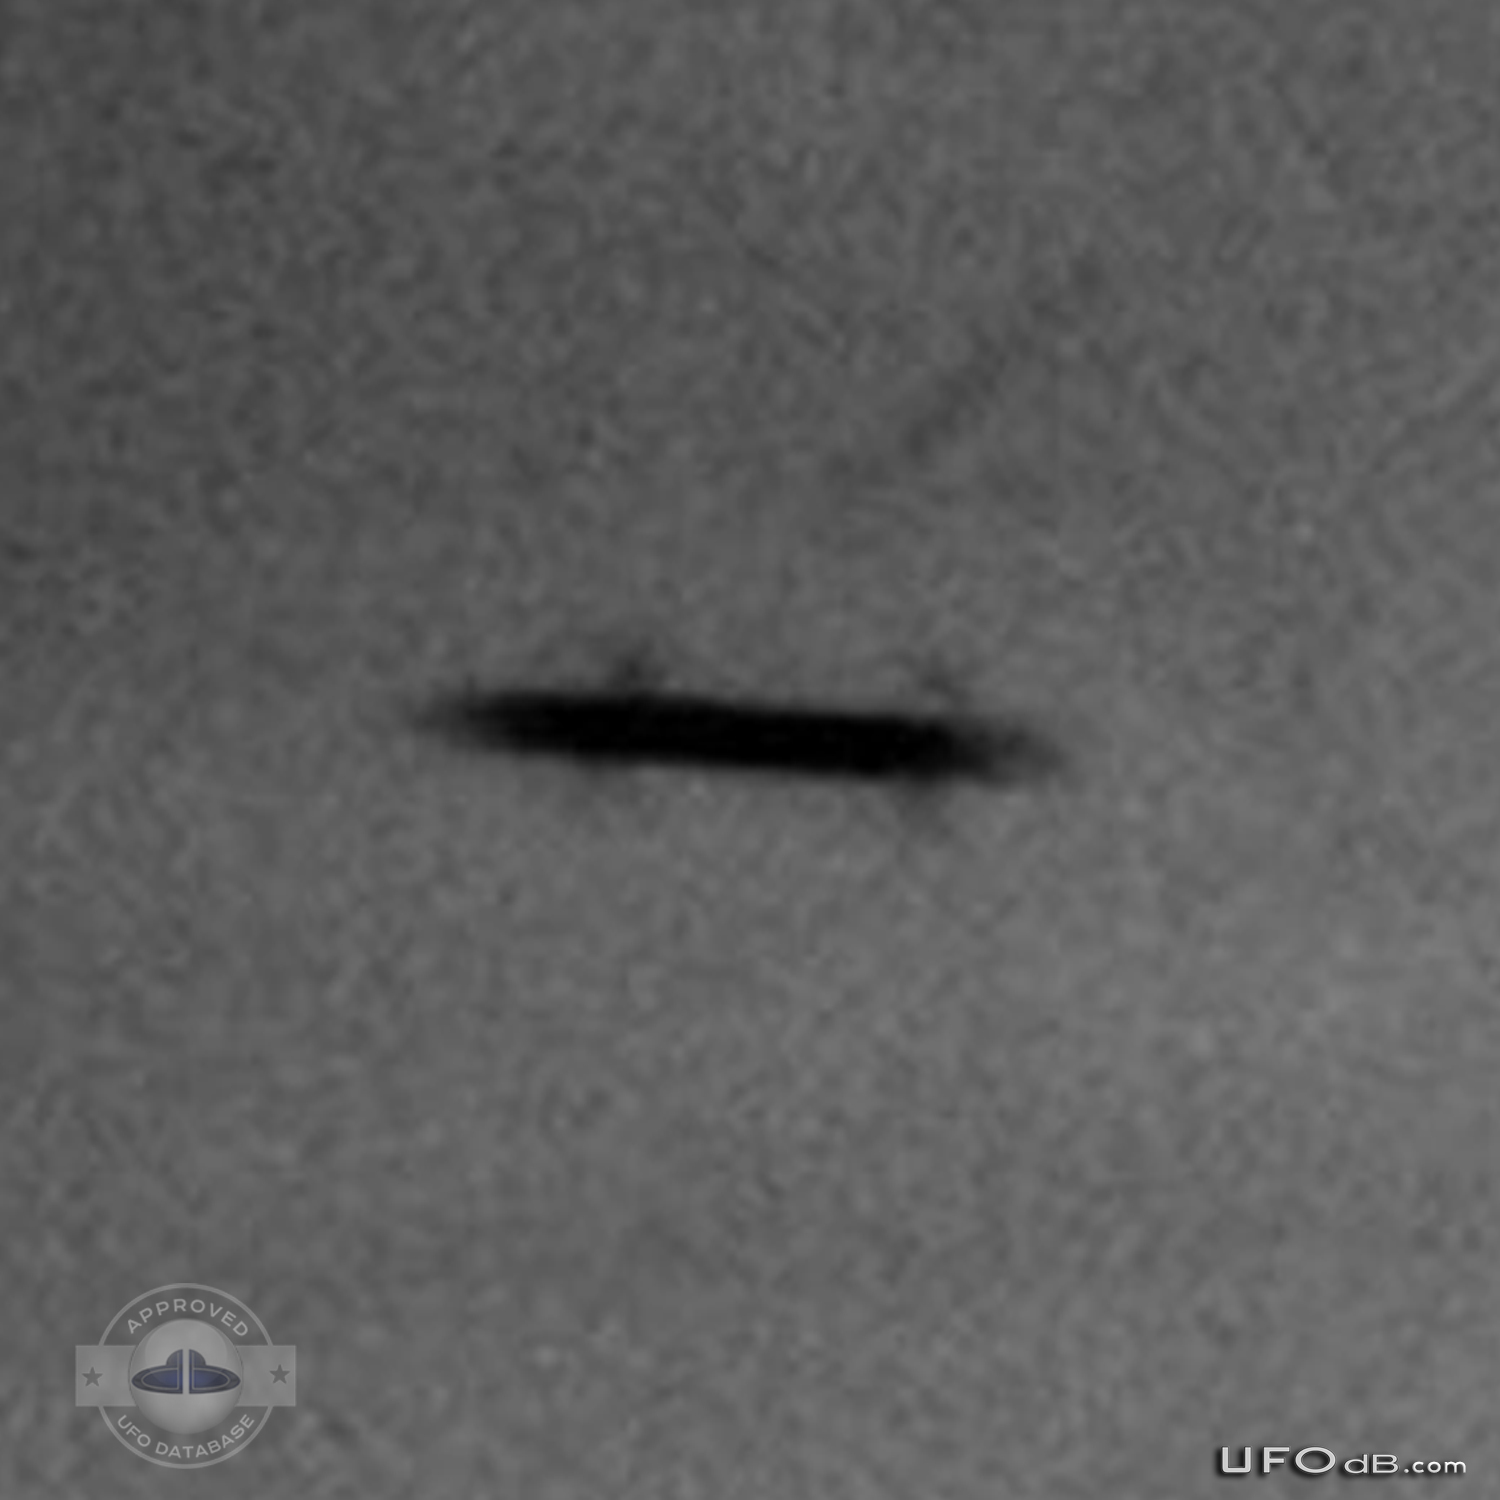 Dark Winged Saucer UFO over the town of Havant, England | April 7 2011 UFO Picture #263-4